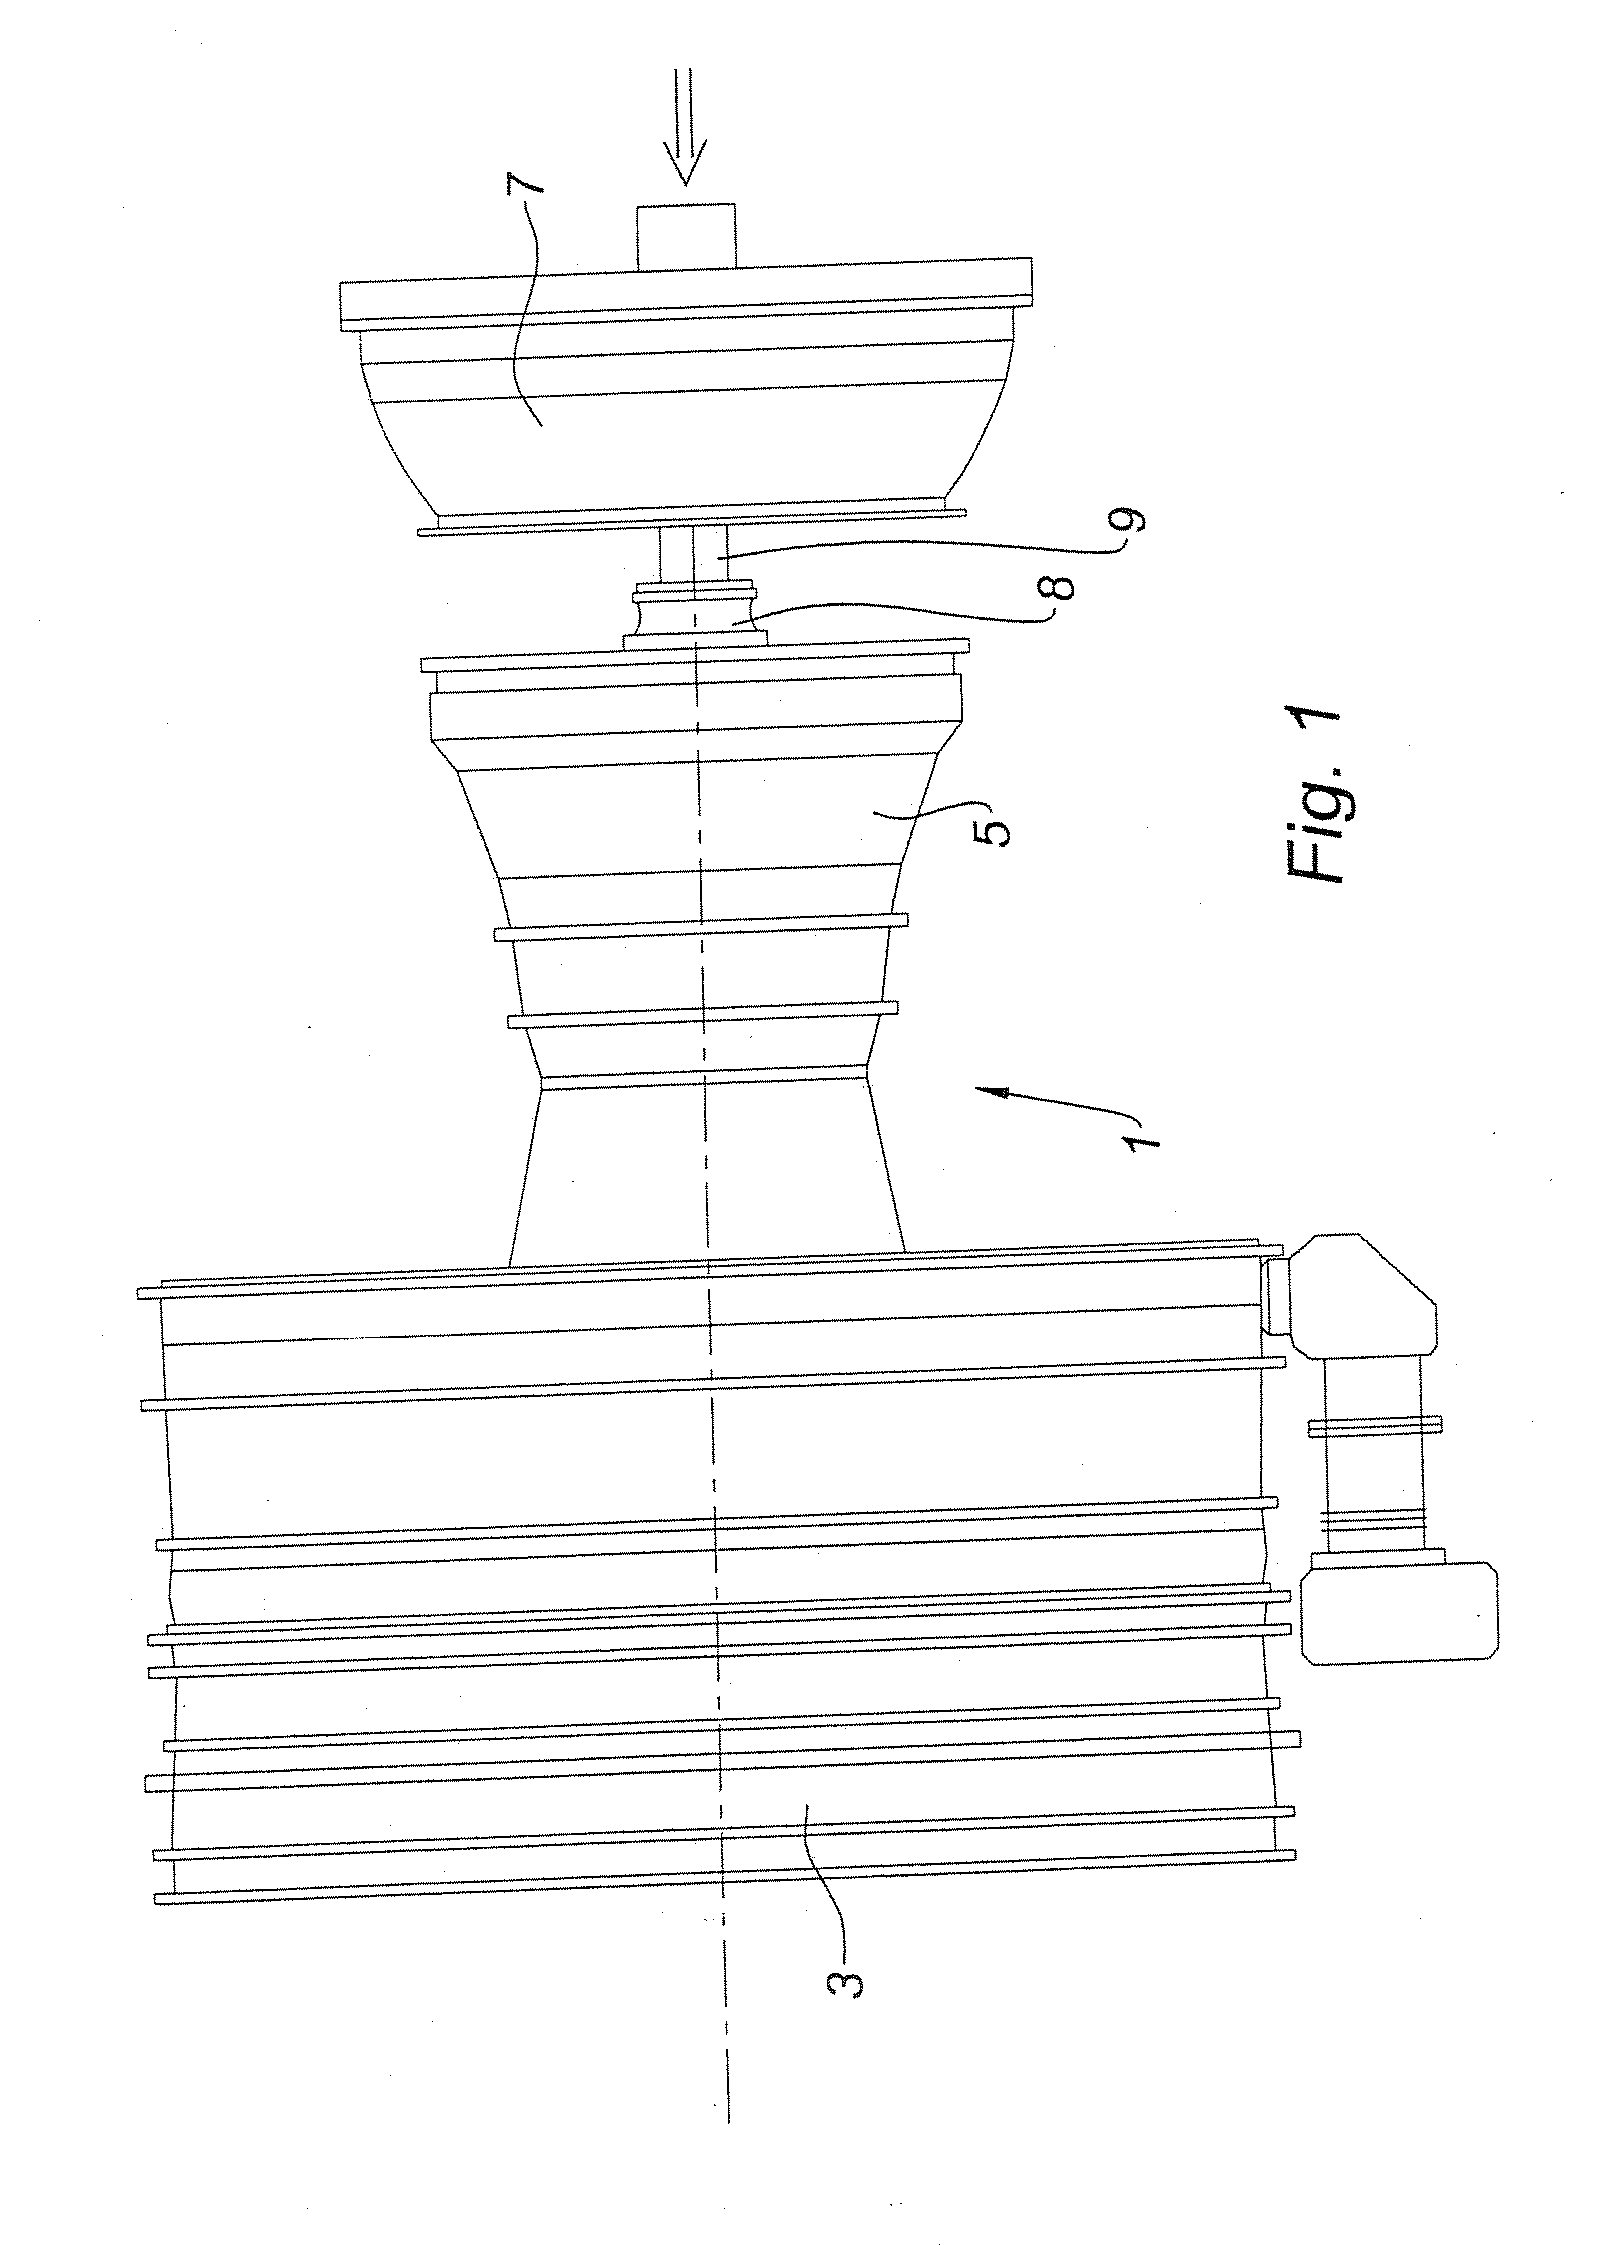 Method of assembling a turbomachine